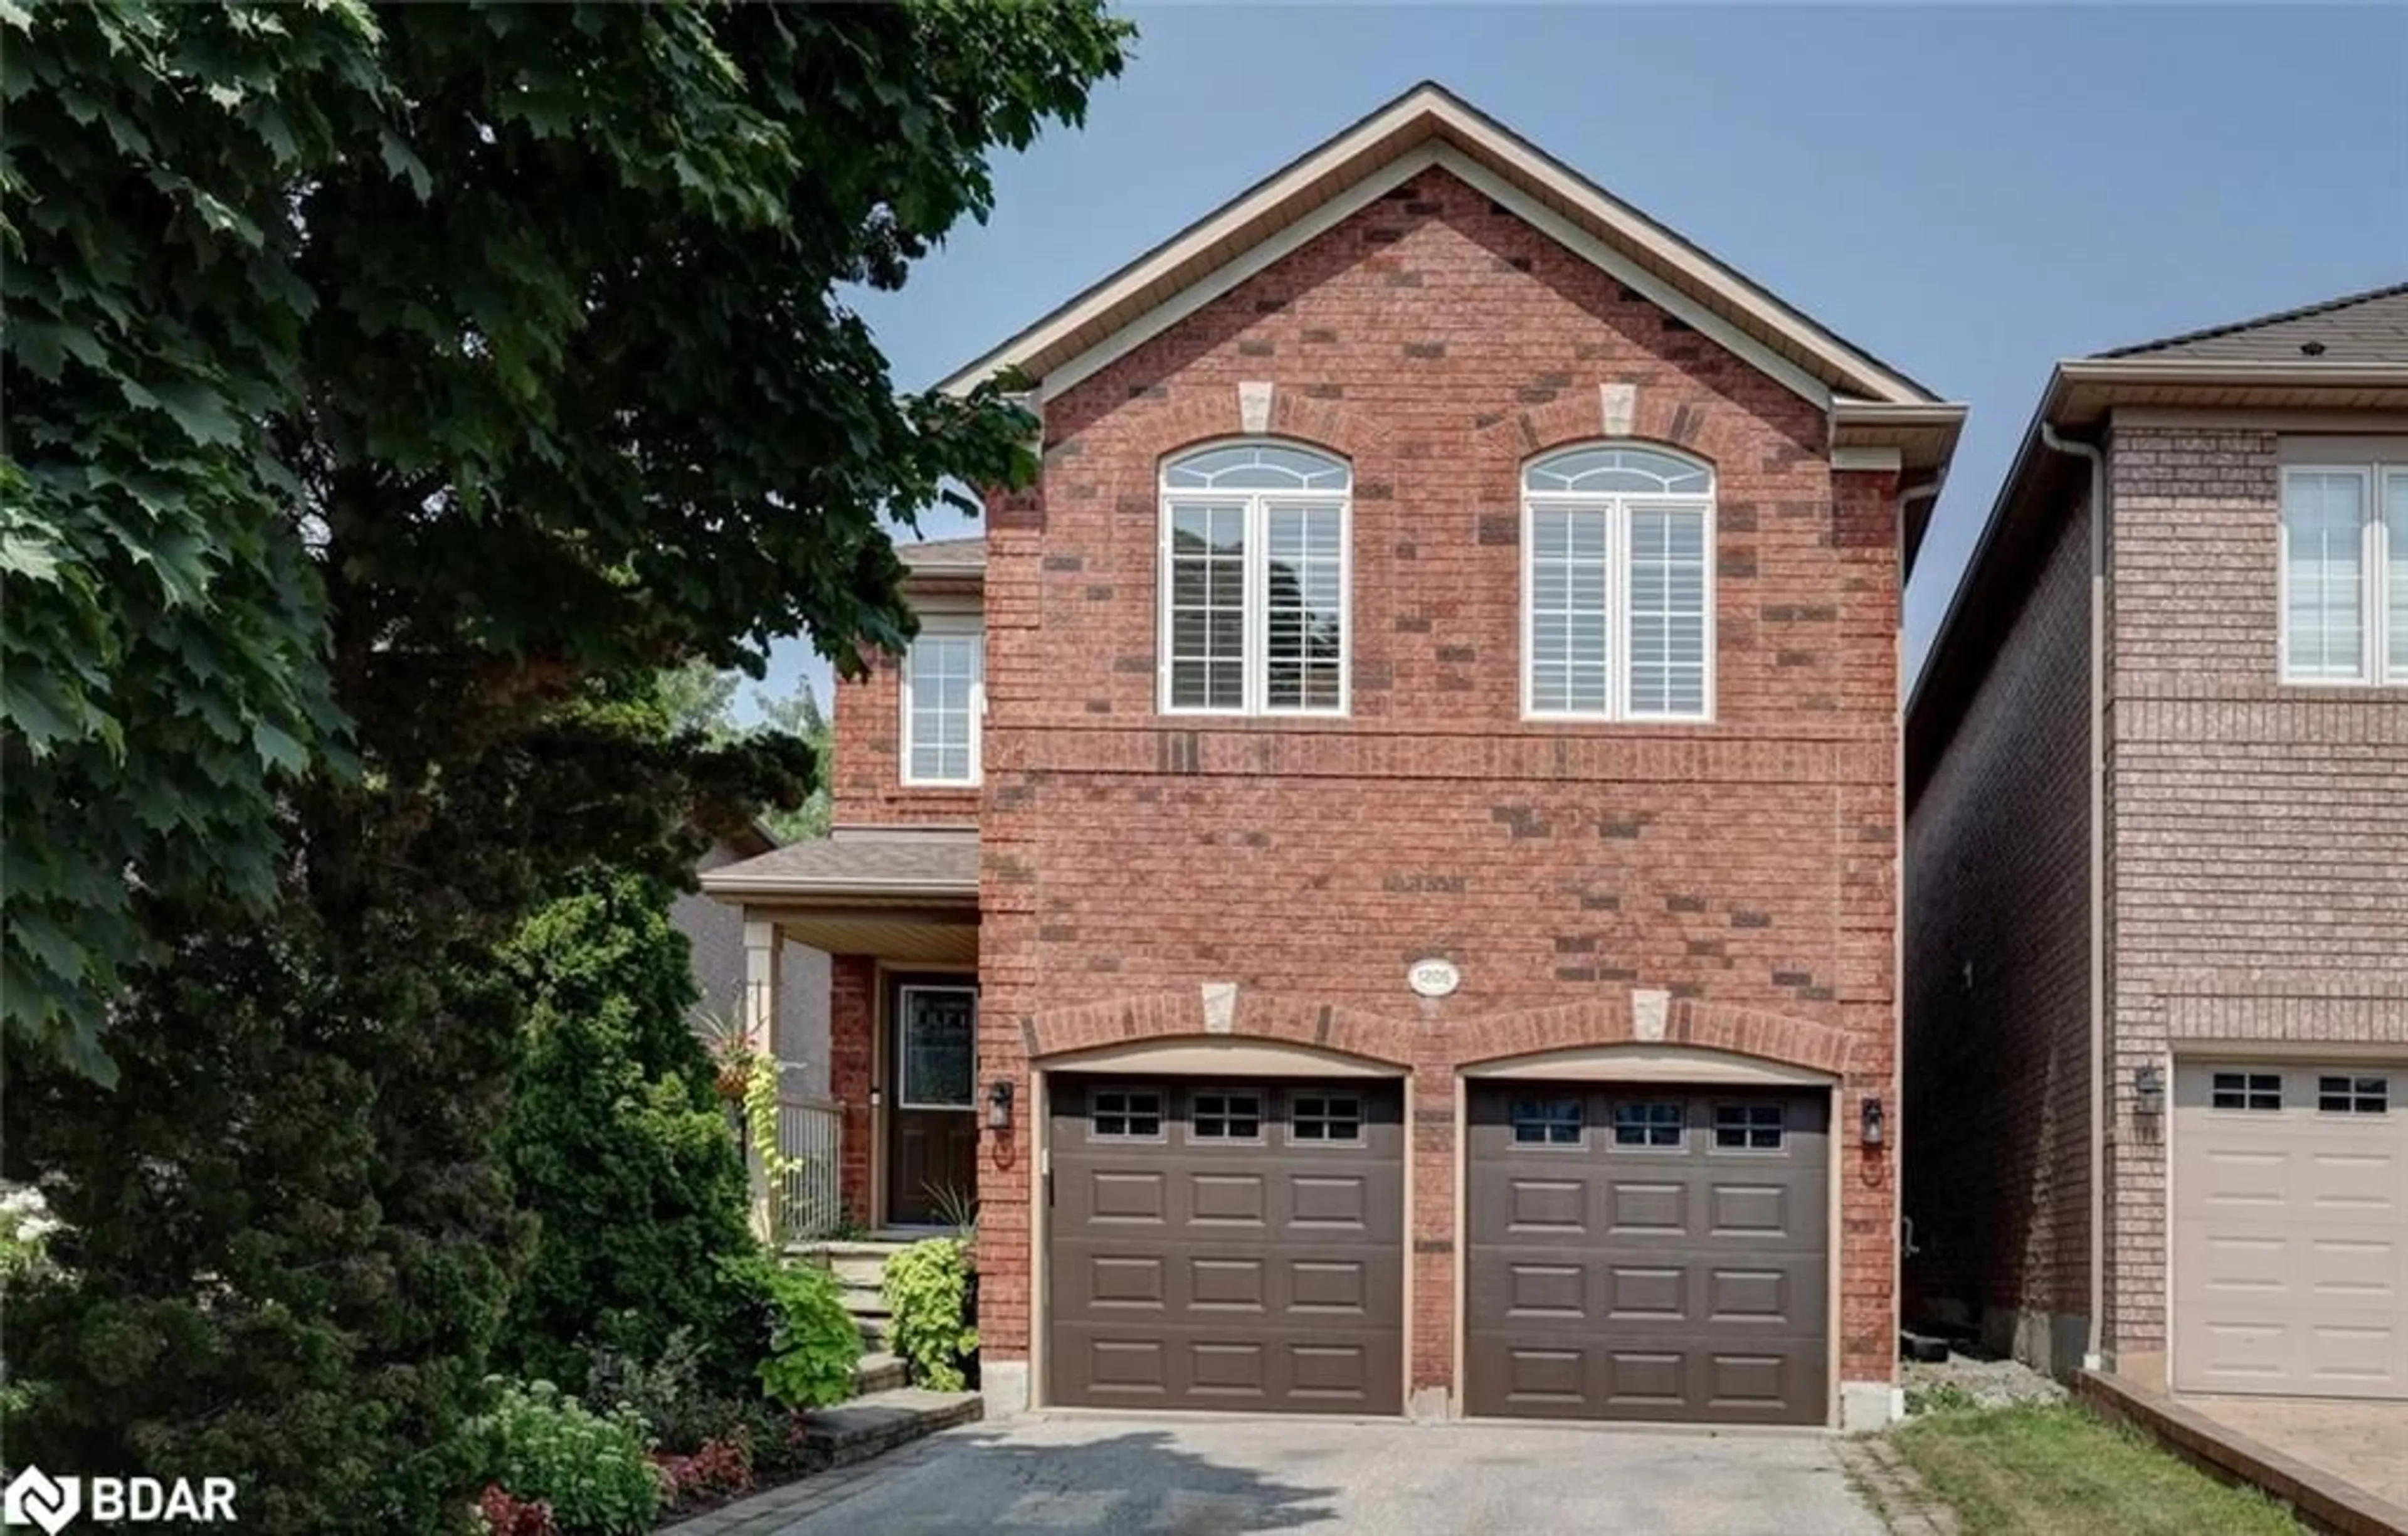 Home with brick exterior material for 1205 Barnswallow Crt, Peel Ontario L5V 2J6